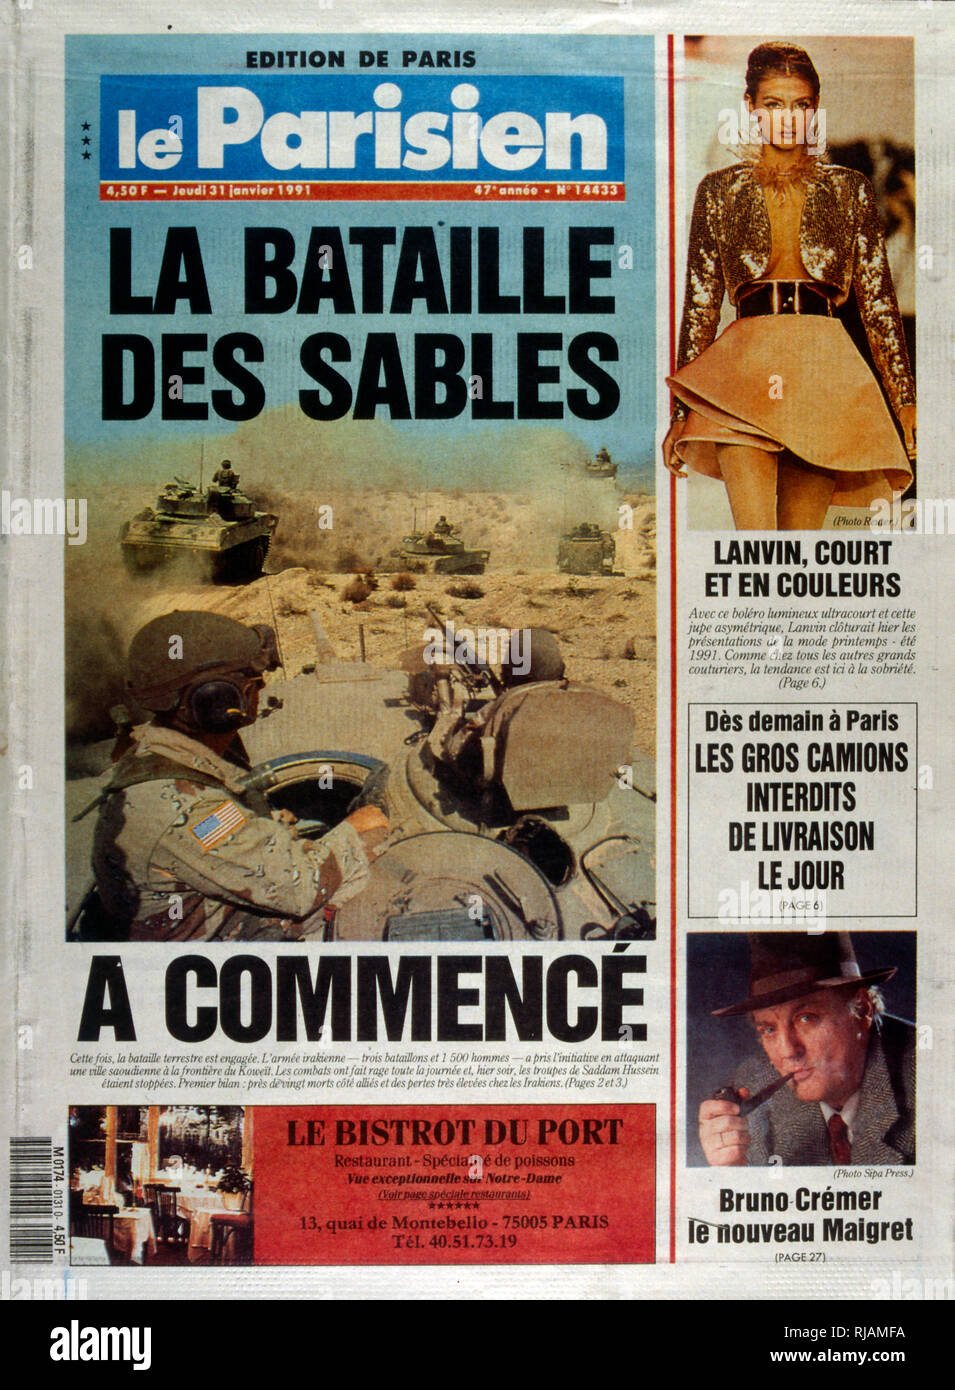 Front Page of the French publication 'Le Parisien' reporting on the Gulf War 31st January, 1991. The Gulf War (2 August 1990 - 28 February 1991), codenamed Operation Desert Shield and Operation Desert Storm, was a war waged by coalition forces from 35 nations led by the United States against Iraq in response to Iraq's invasion and annexation of Kuwait. Stock Photo